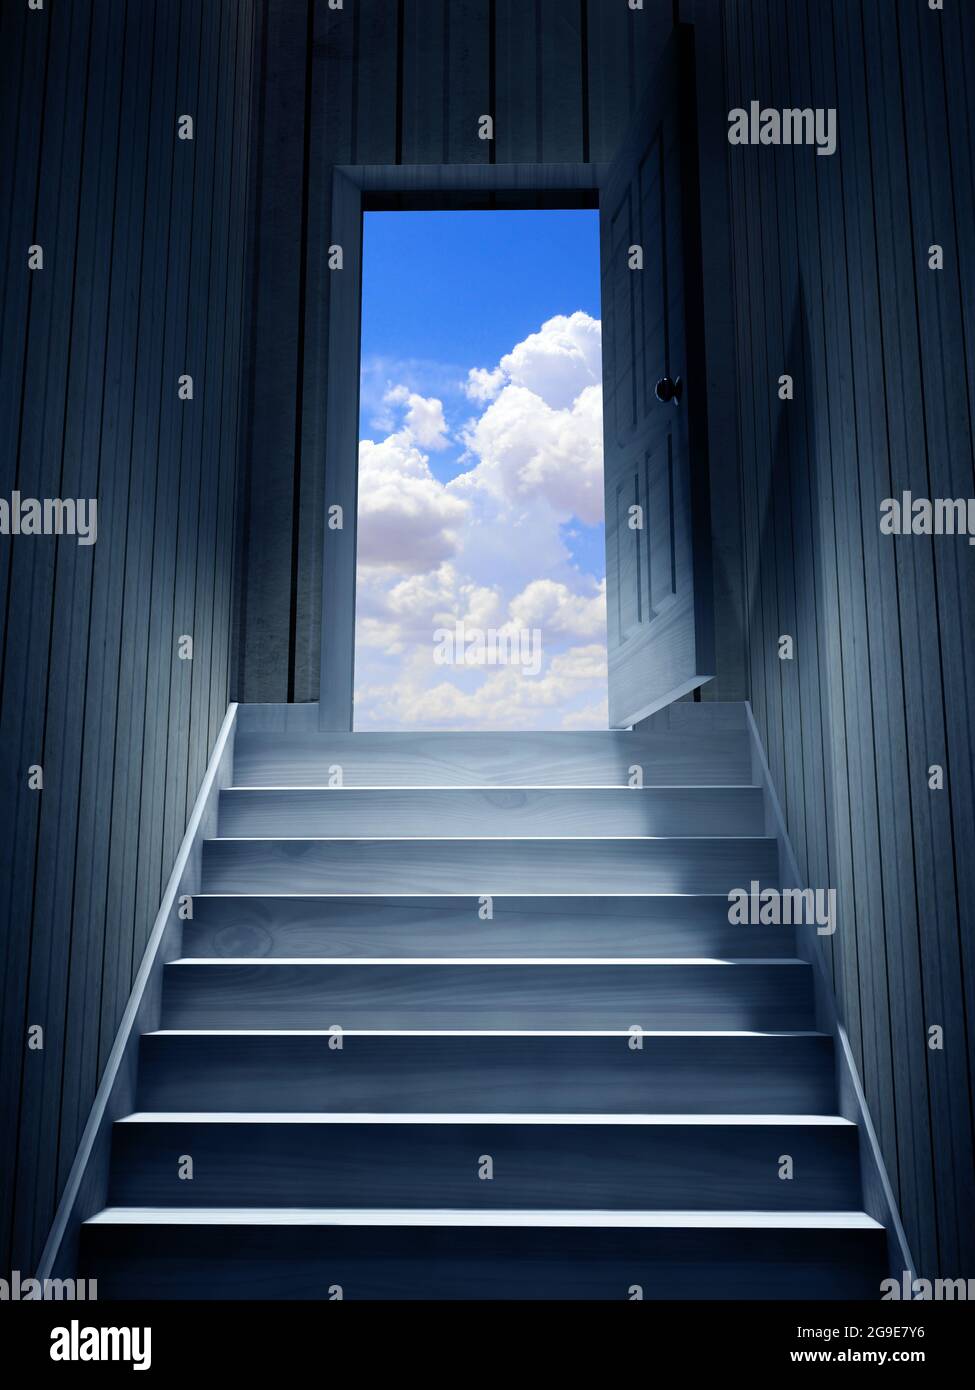 Hope and spirituality concept. Steps leading from a dark basement to open the door. Blue sky with clouds visible through an open door. 3d render Stock Photo